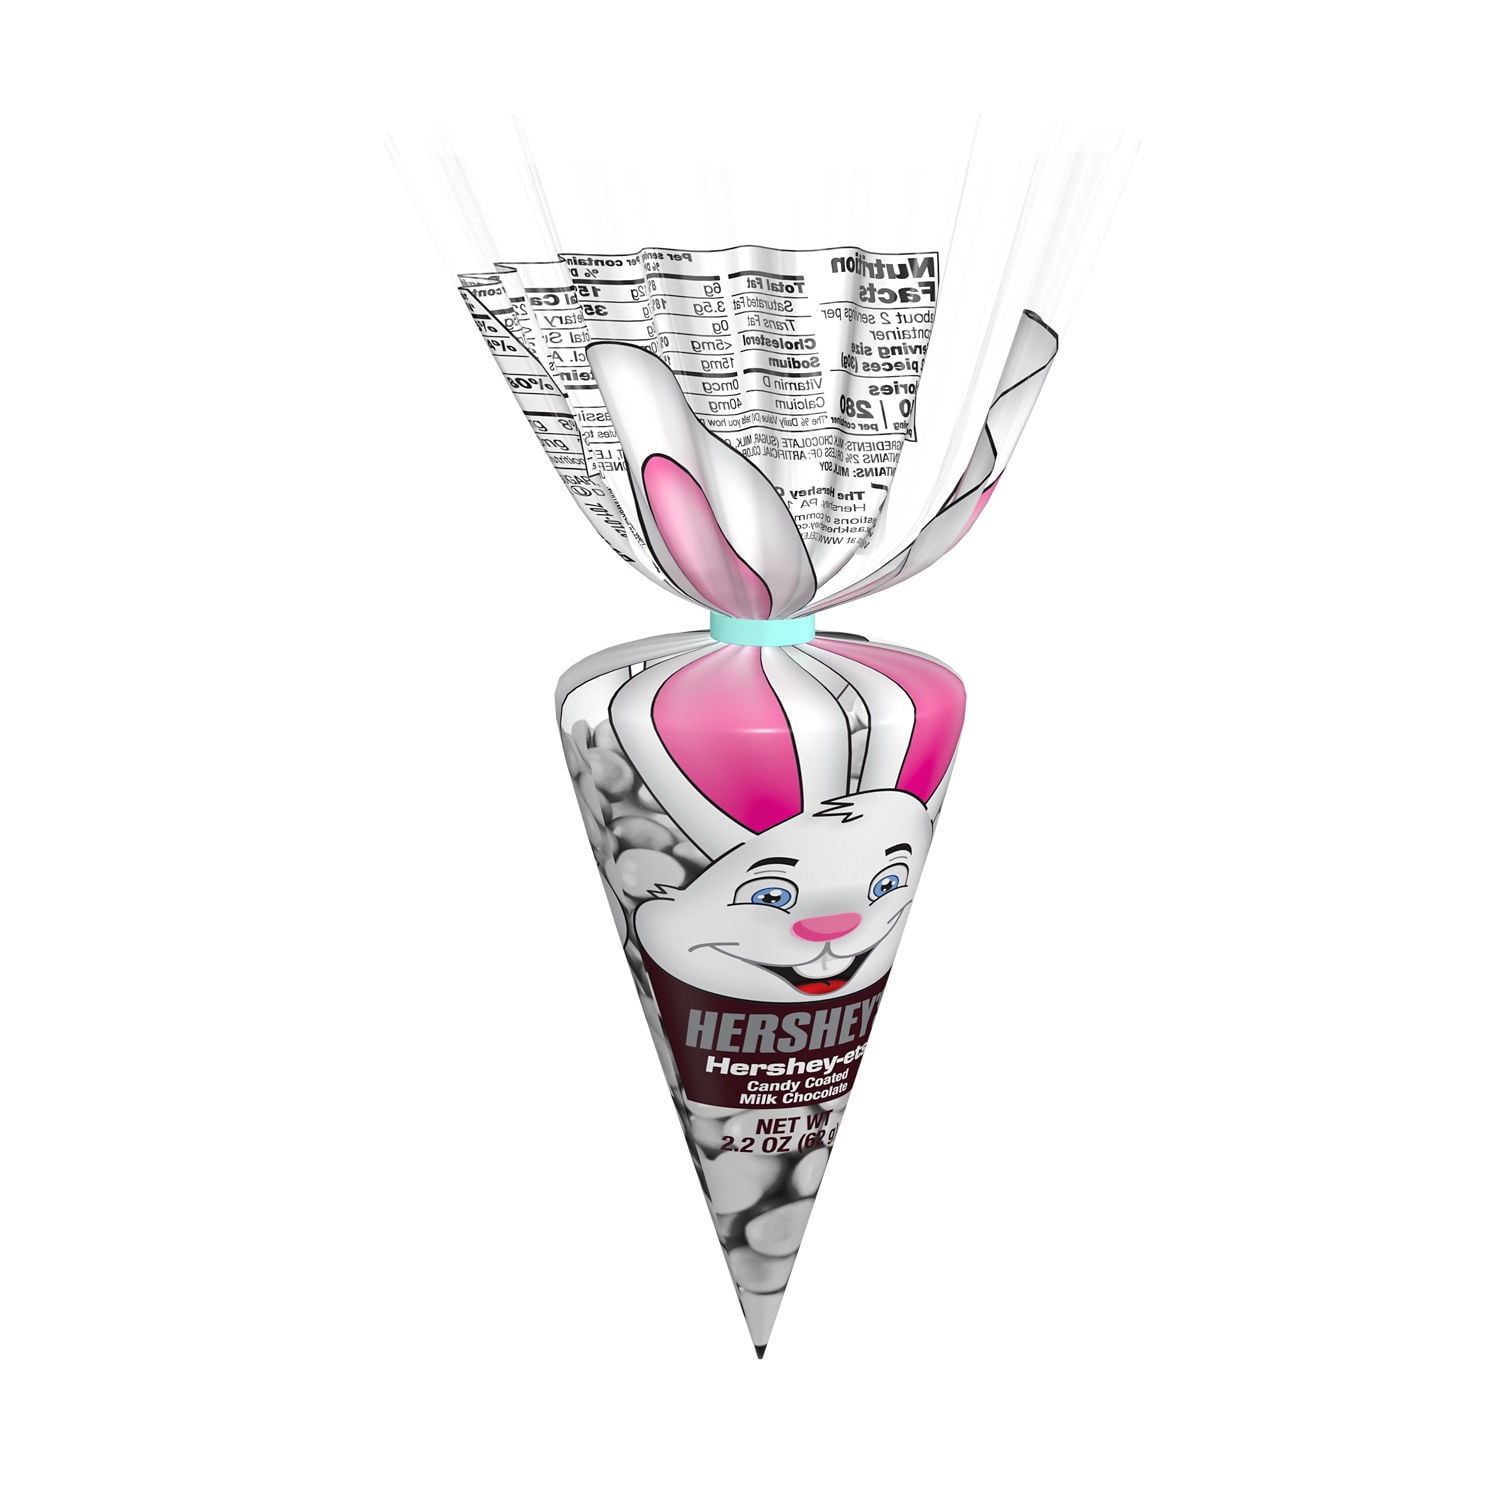 HERSHEY'S, HERSHEY-ETS Candy Coated Milk Chocolate Treats, Easter Candy, 2.2 oz, Carrot Bag